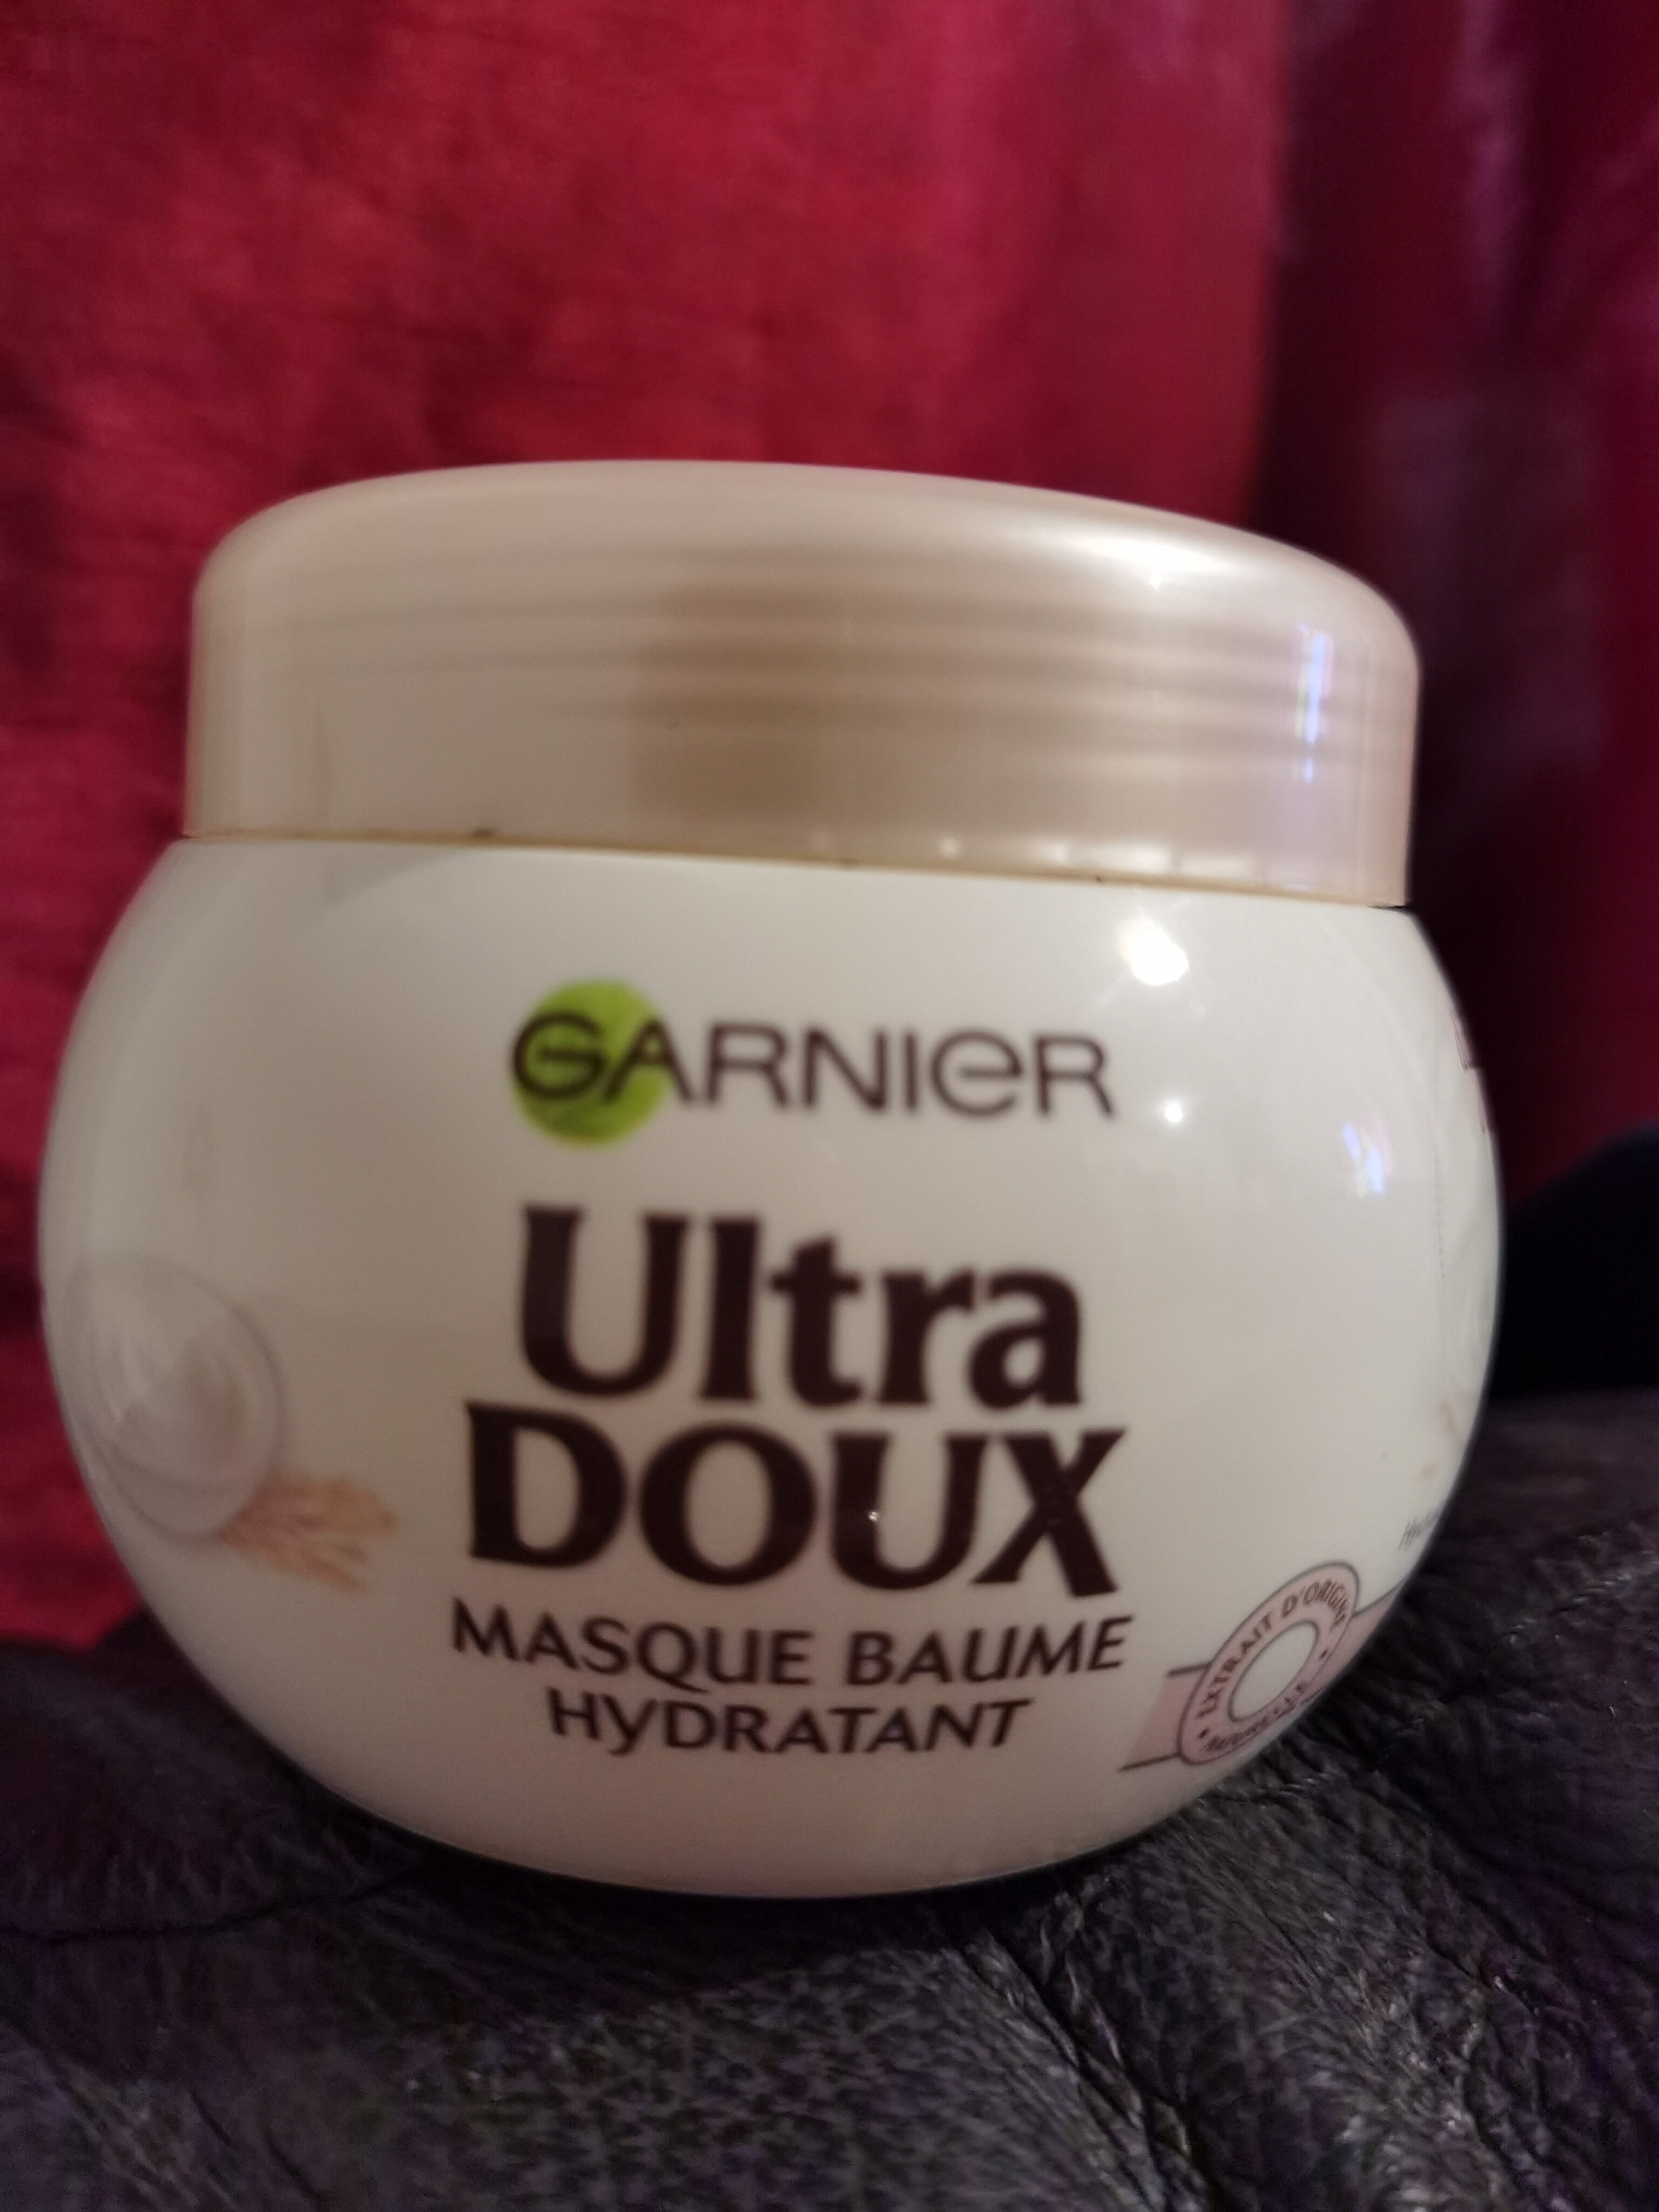 Ultra doux masque baume hydratant - Tuote - fr